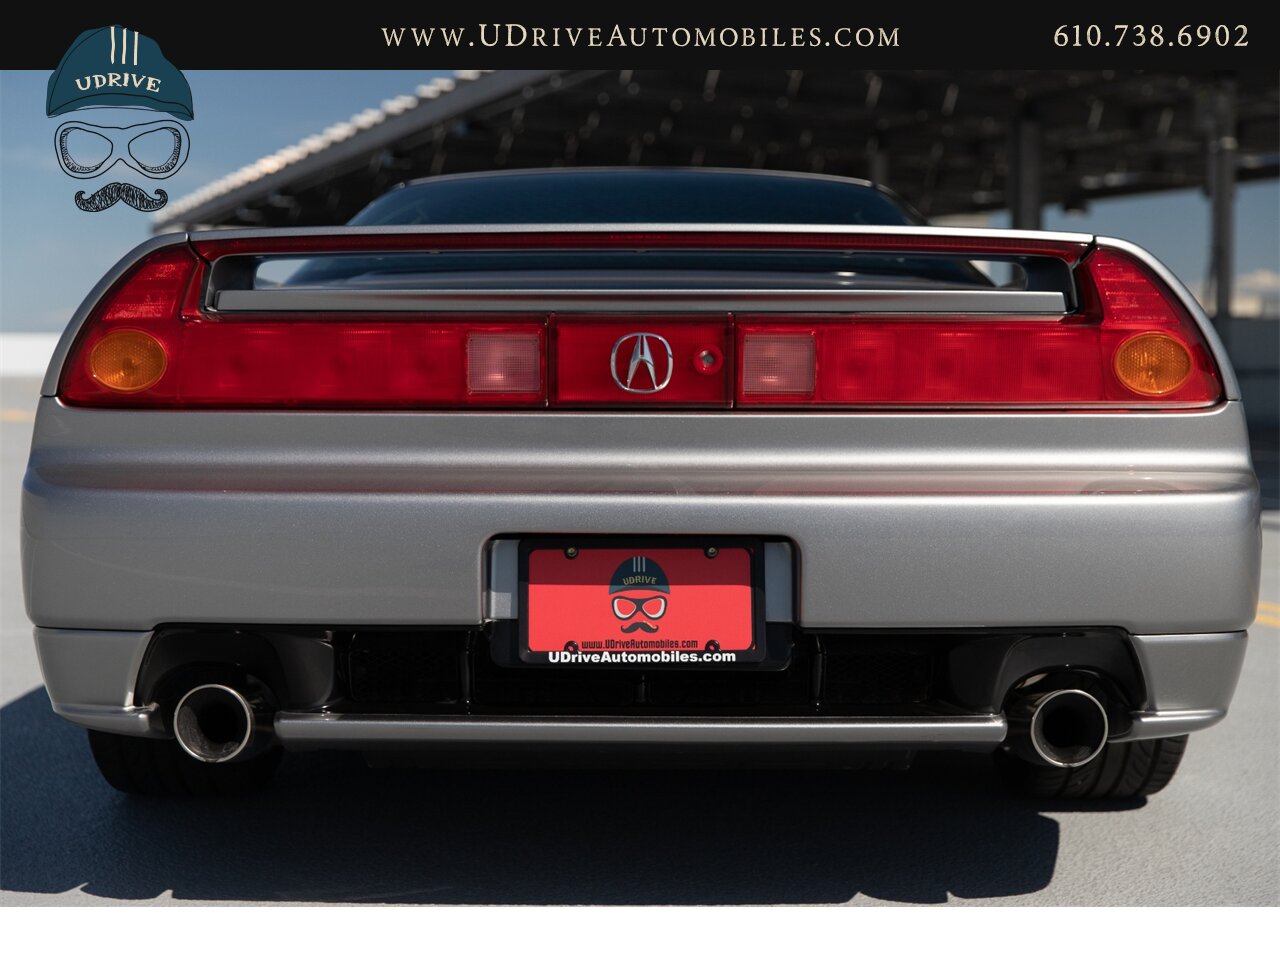 2002 Acura NSX NSX-T 9k Miles 6 Speed Manual Service History  Collector Grade - Photo 21 - West Chester, PA 19382